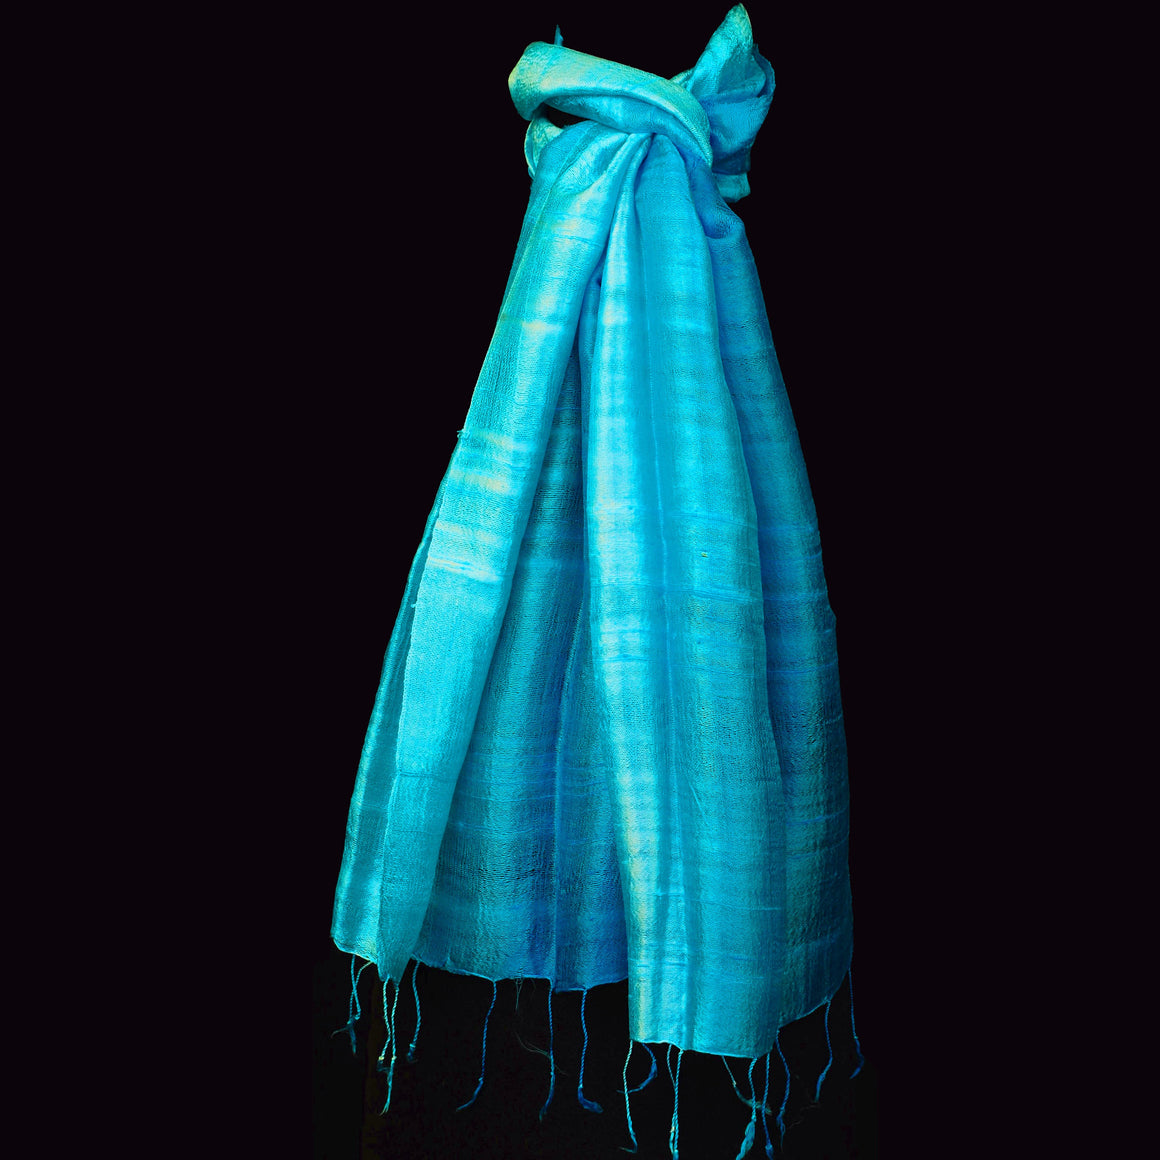 ARTISAN CRAFTED HAND WOVEN 100% RAW SILK THAI SCARF SCARVES ZENZOEY JEWELRY & ACCESSORIES 